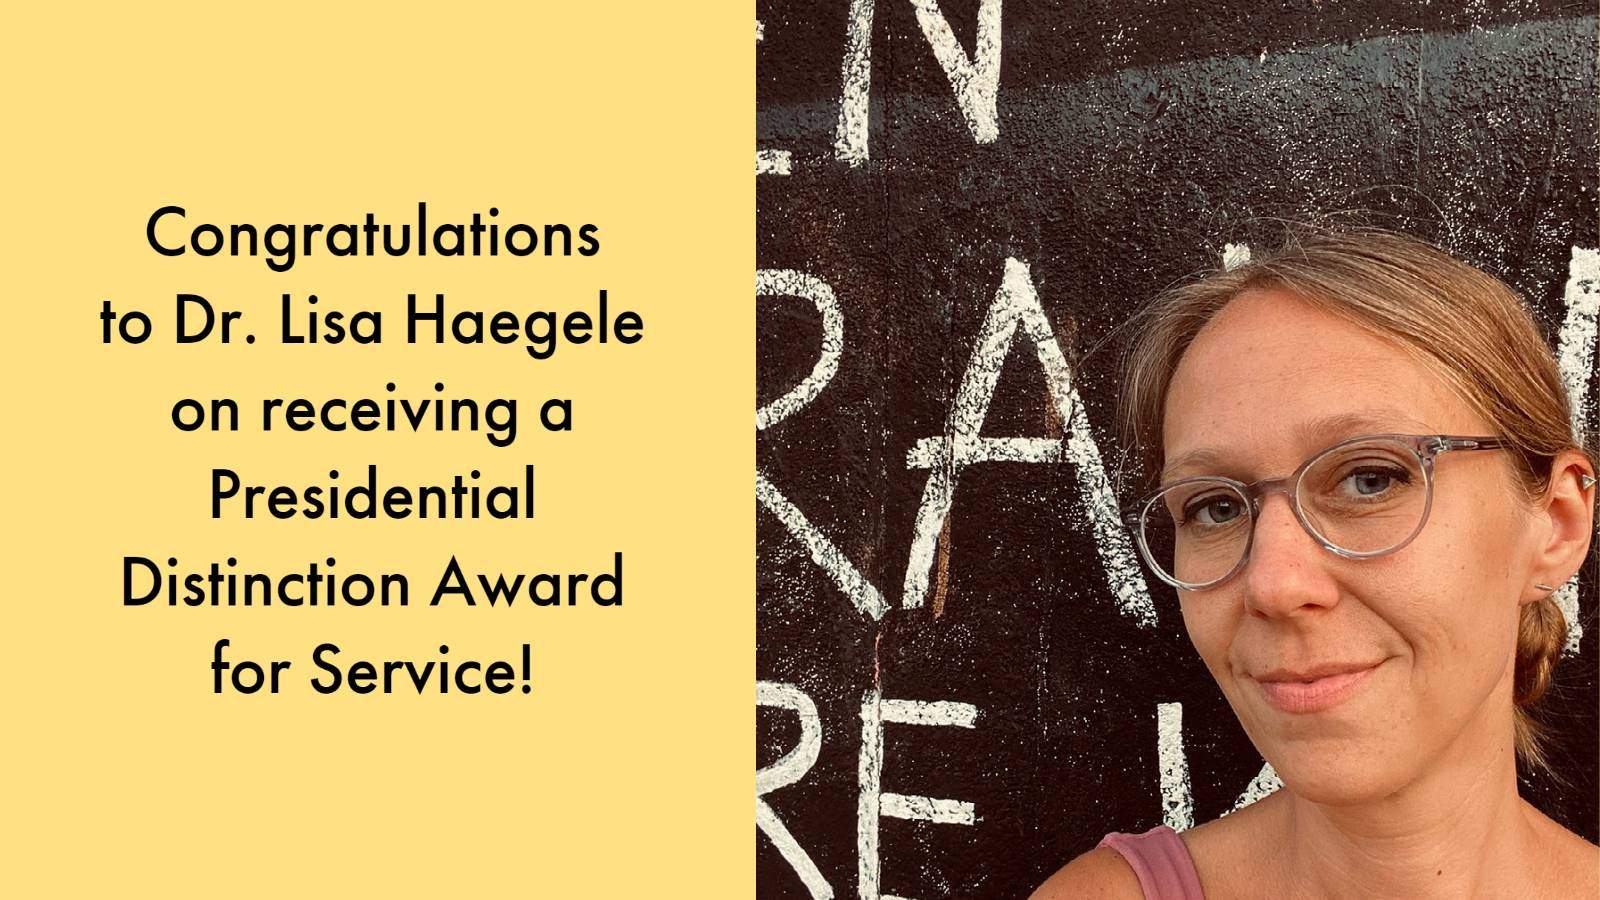 woman wearing glasses in front of wall, text: Congratulations to Dr. Lisa Haegele on receiving a Presidential Distinction Award for Service!